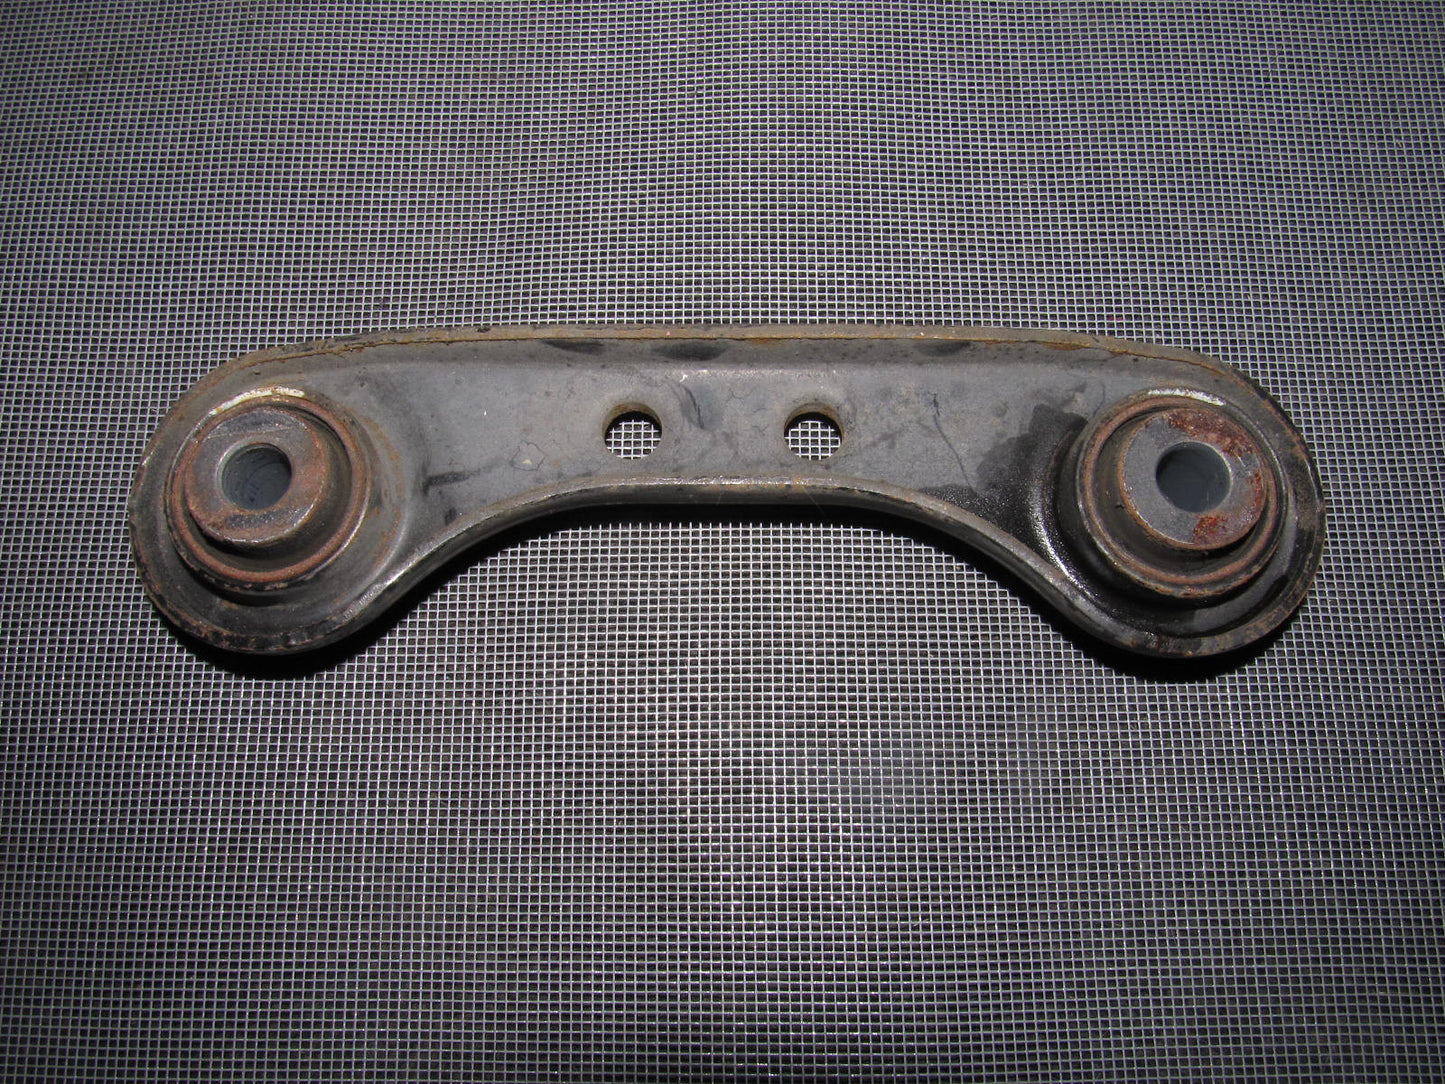 94-01 Acura Integra OEM Control Arm Knuckle Link - Rear Left or Right